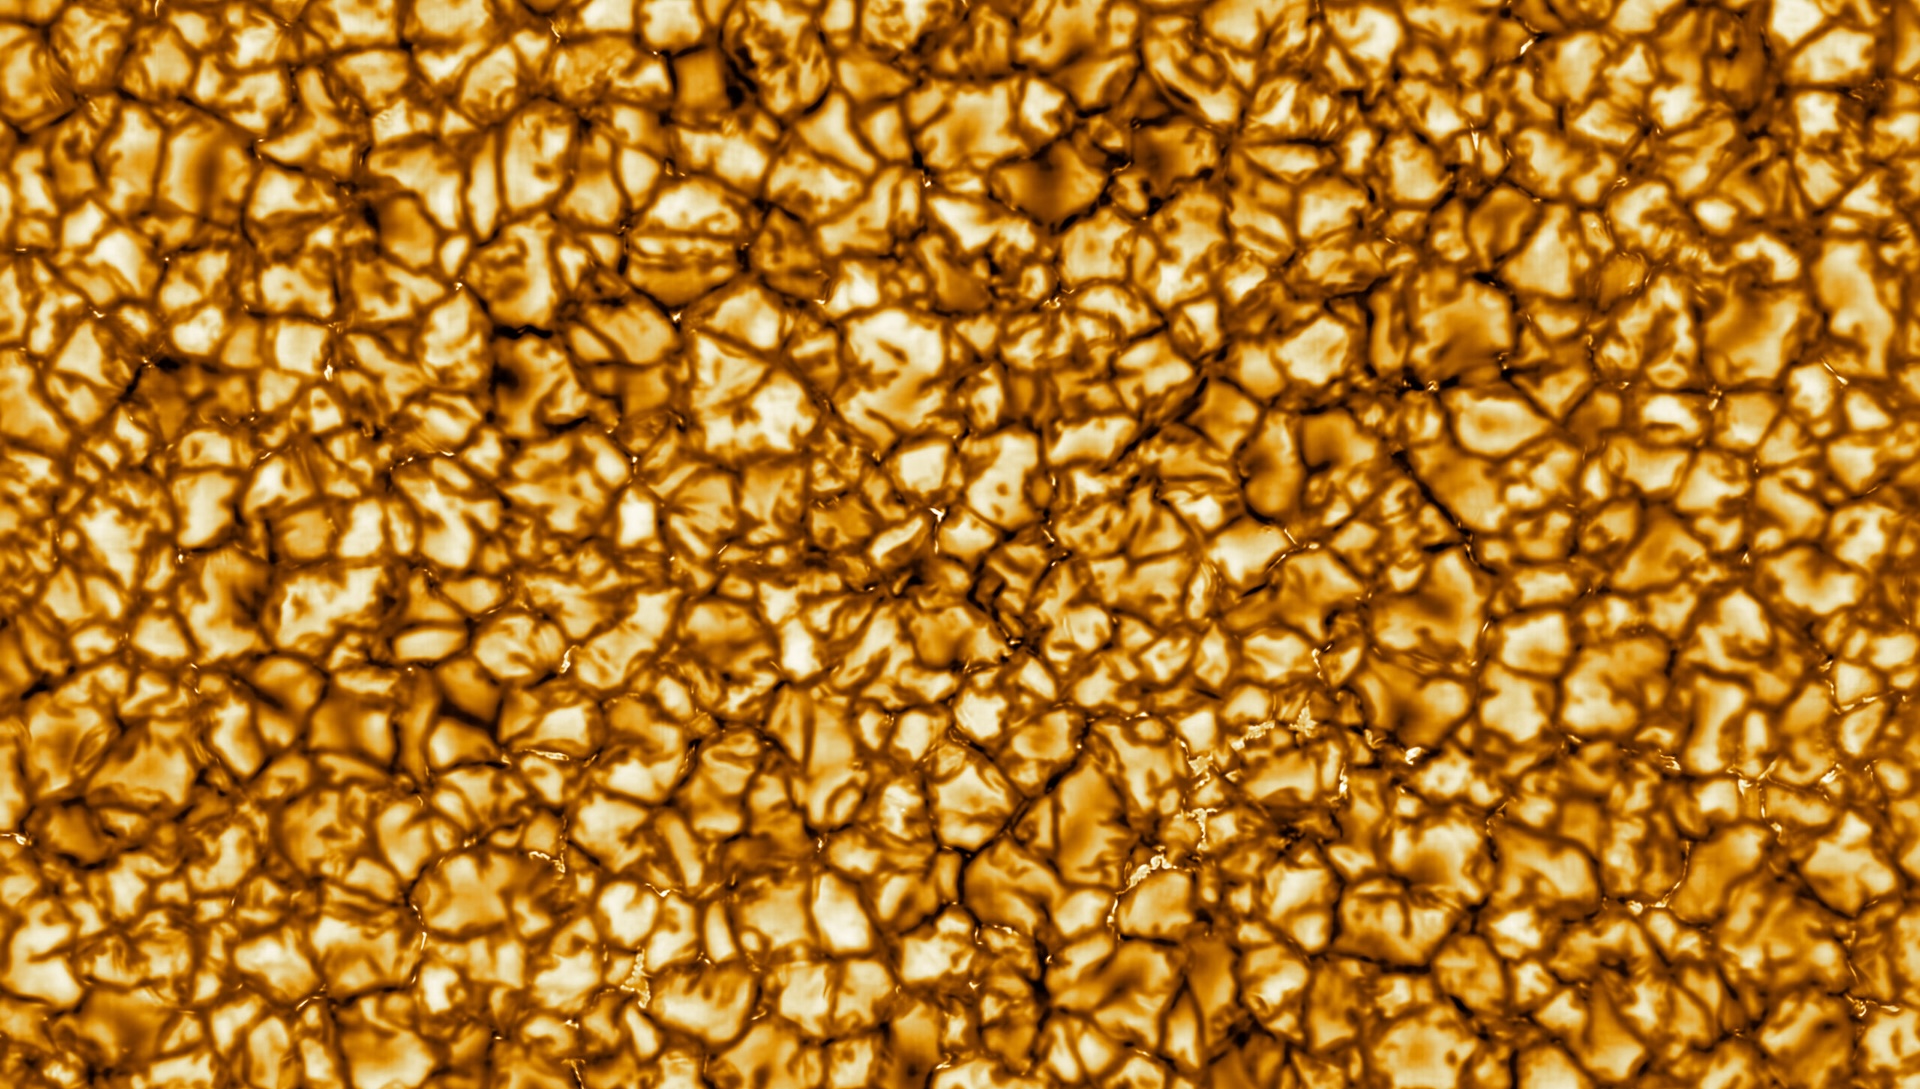 Astronomers have observed new patterns in the structure of the Sun